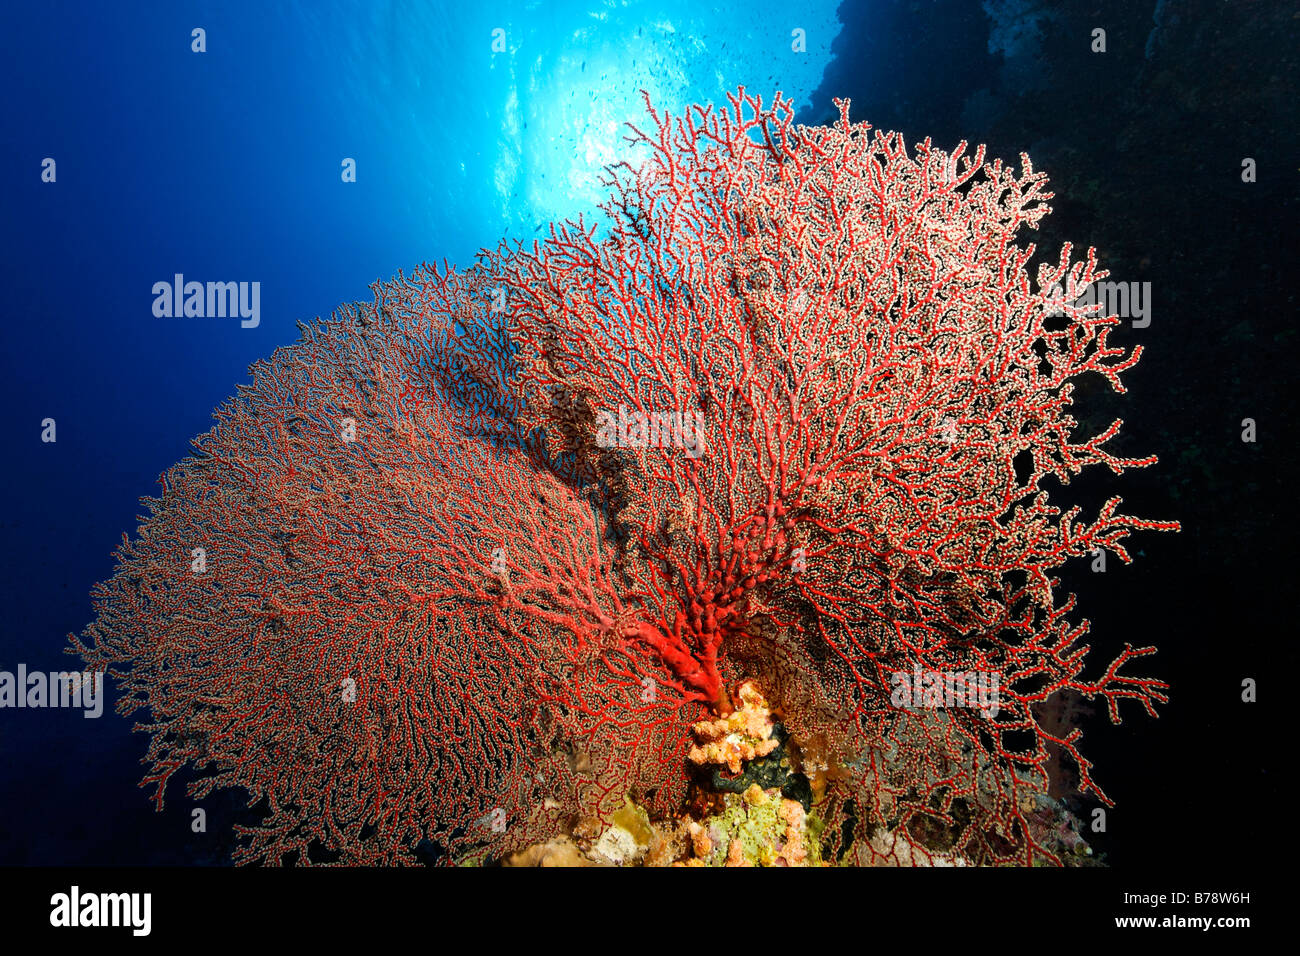 Splendid knotted fan coral (Acabaria splendens) under sunlight, Brother Islands, Hurghada, Red Sea, Egypt, Africa Stock Photo